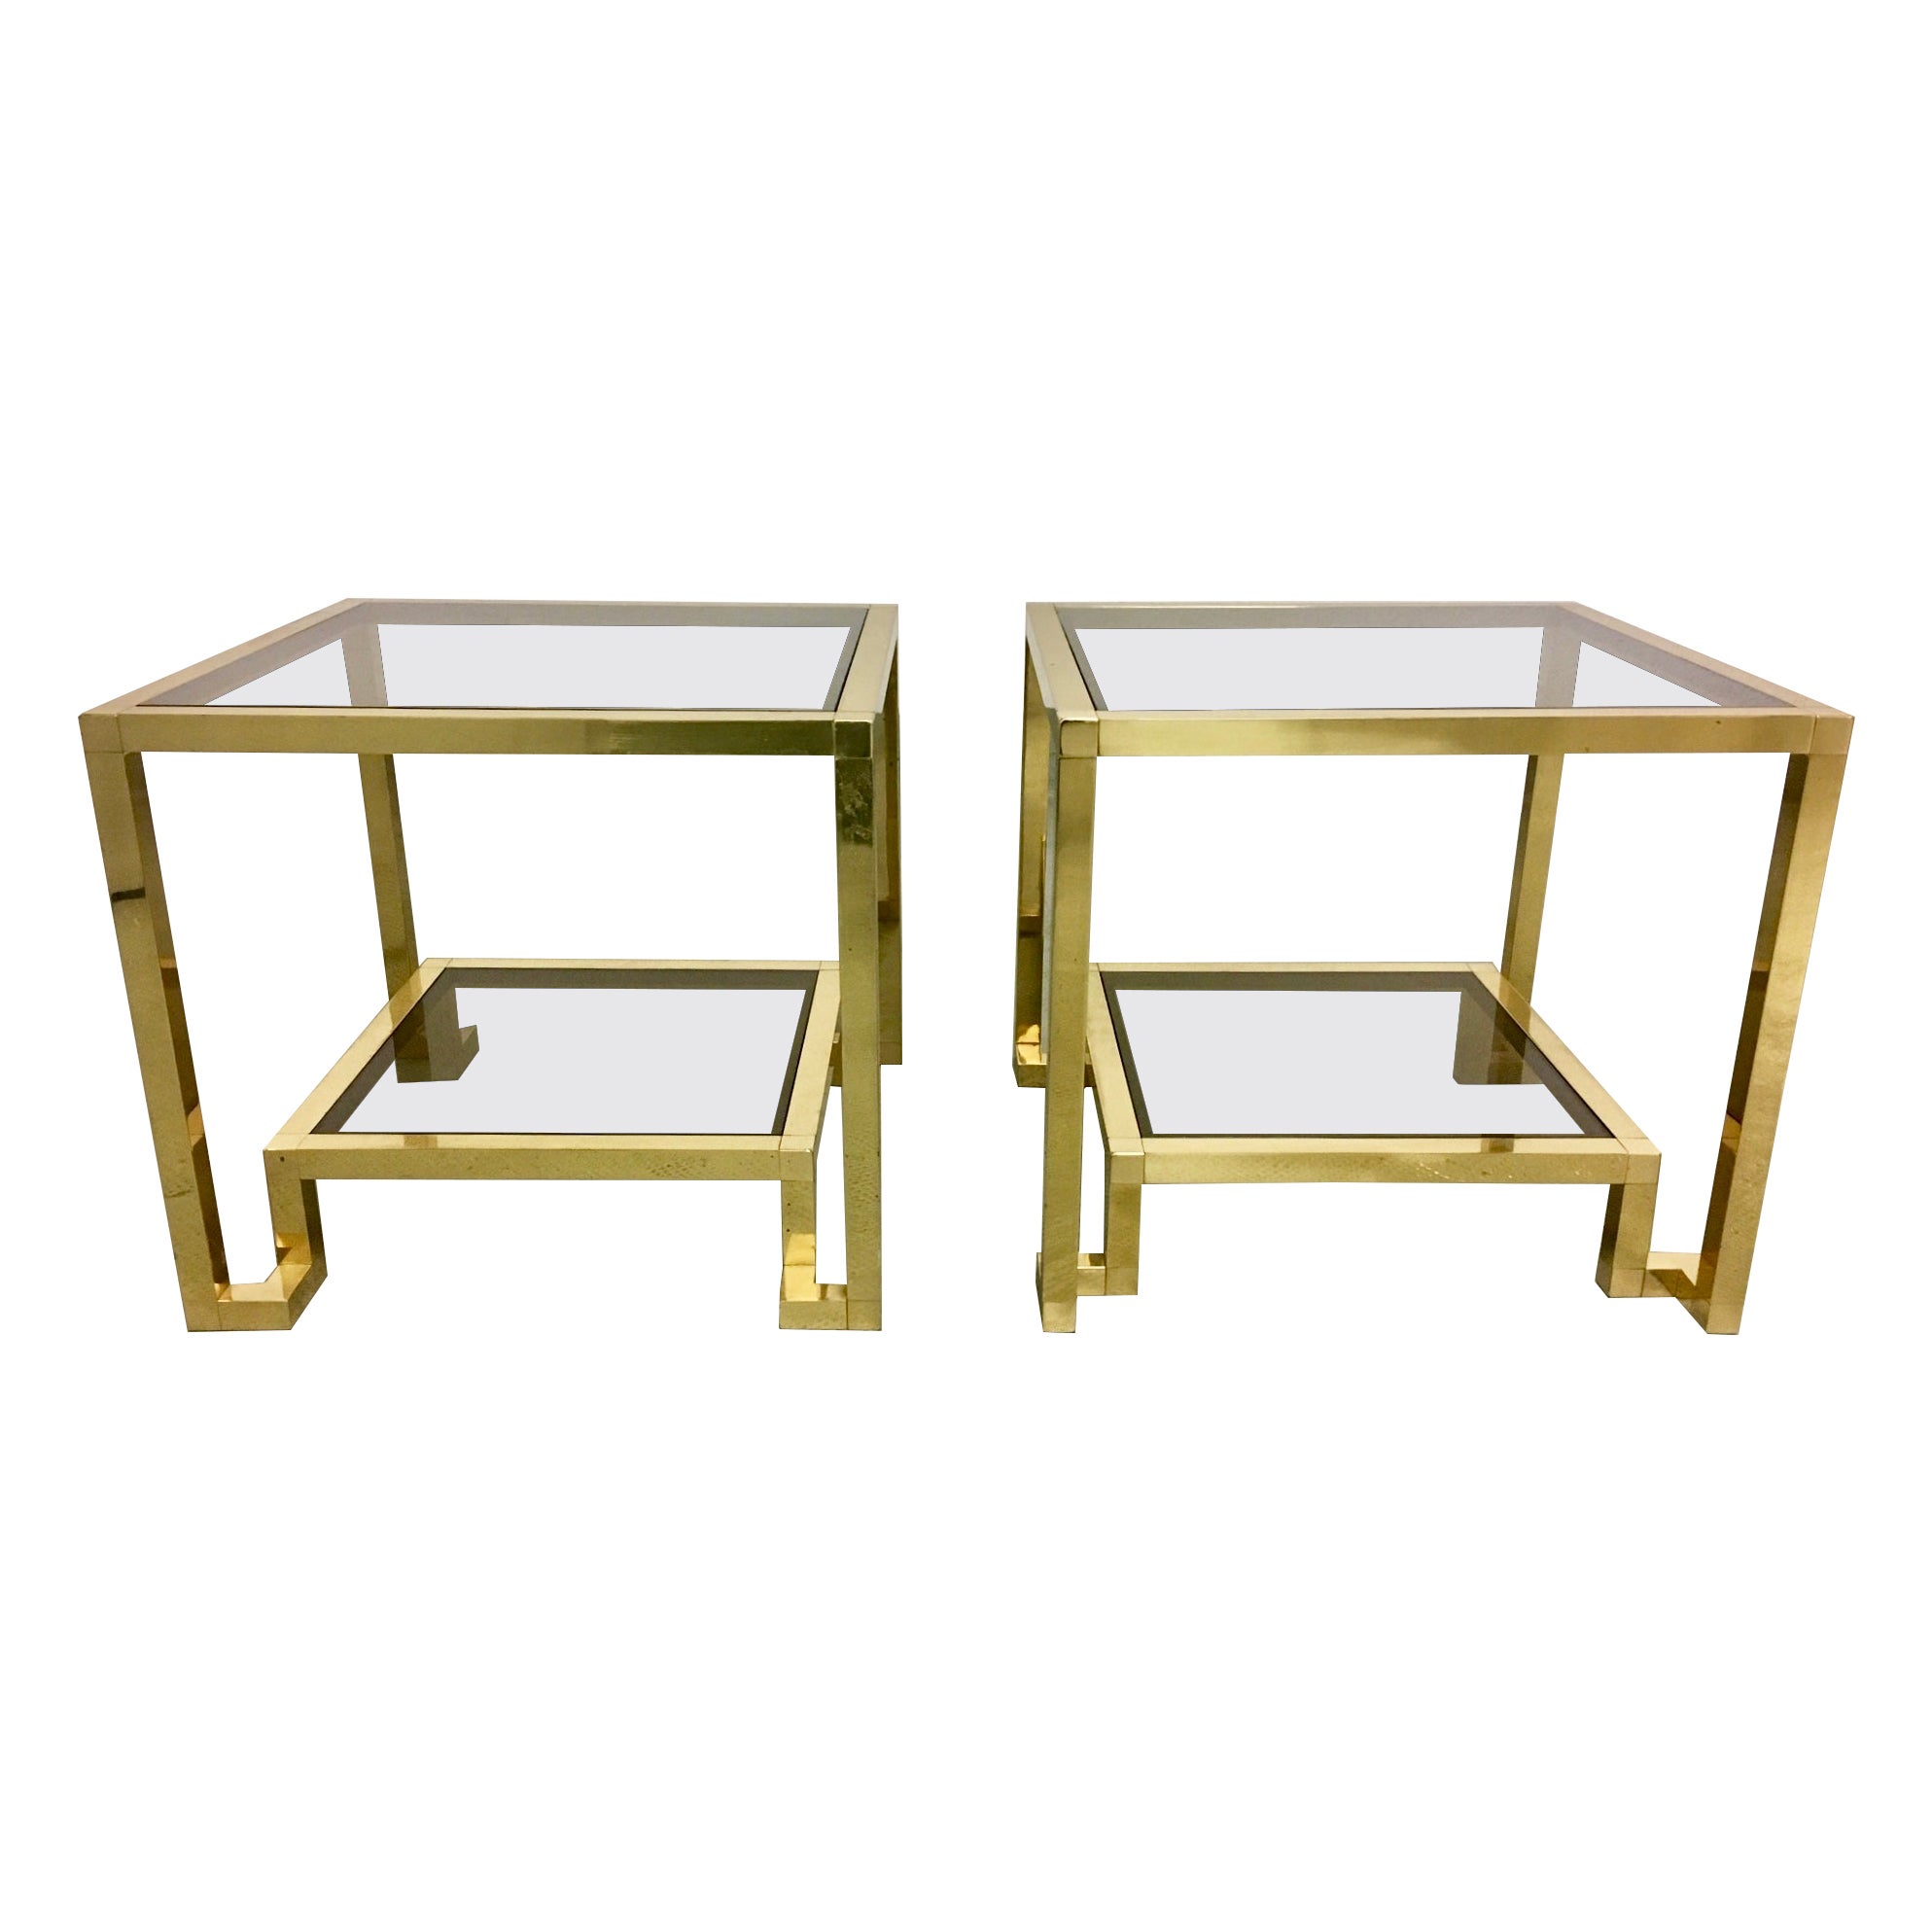 Pair of Brass & Glass Side Tables by Guy Lefèvre for Maison Jansen, France 1970s For Sale